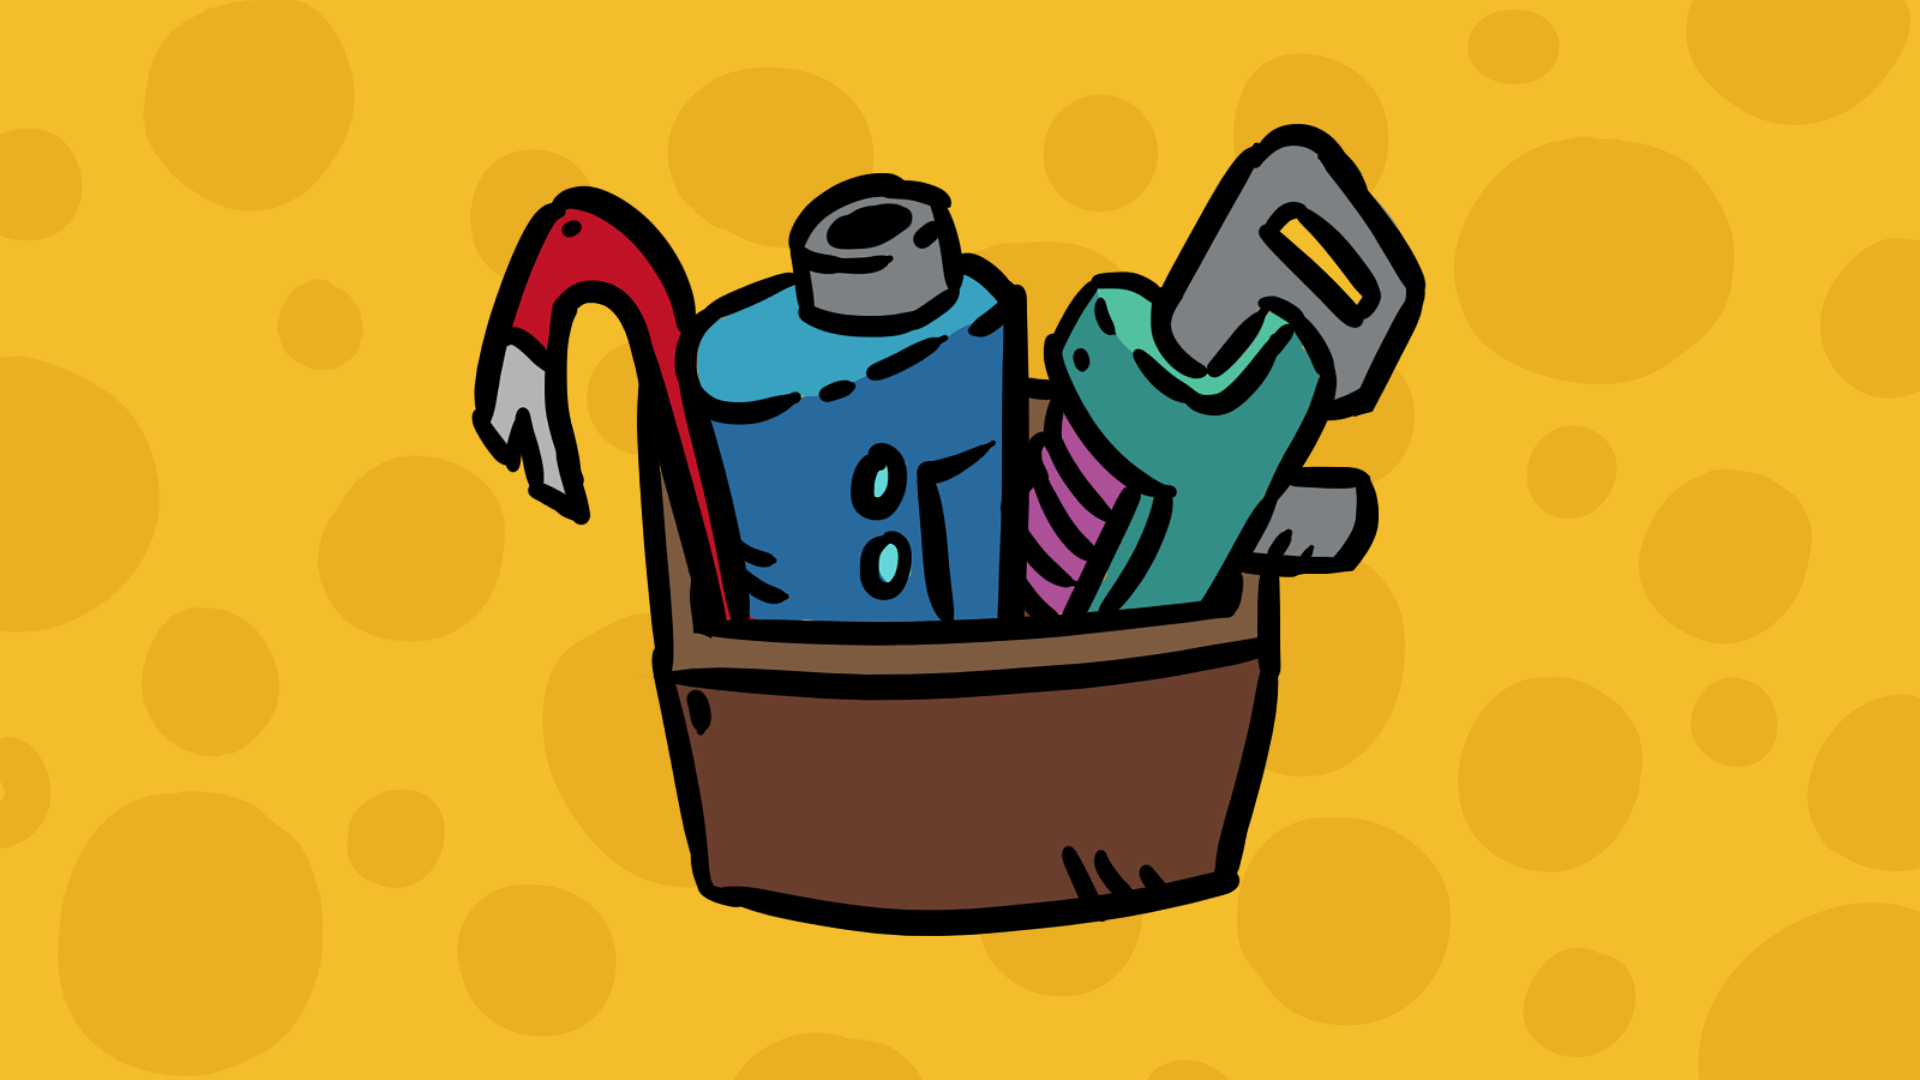 Icon for Shopping Spree